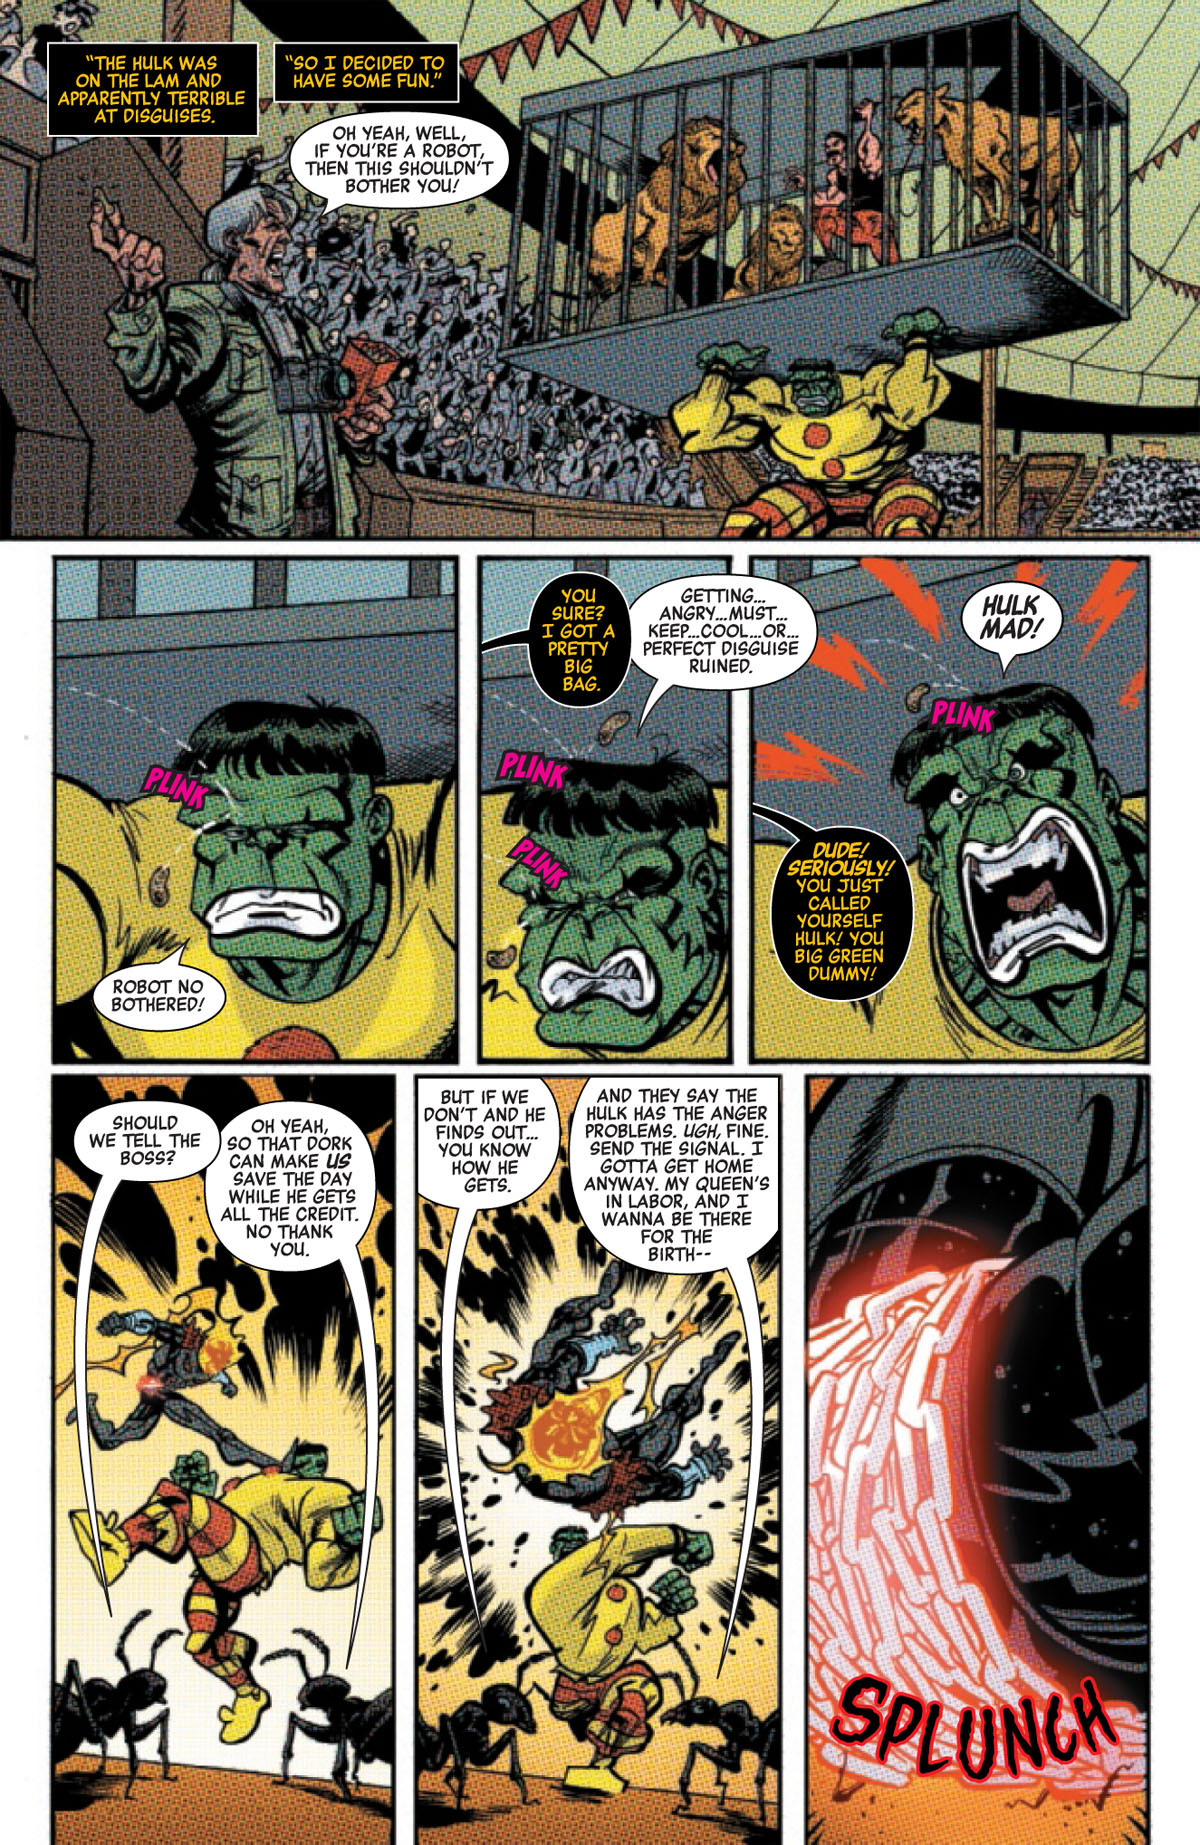 Cosmic Ghost Rider Destroys Marvel History #5 page 5